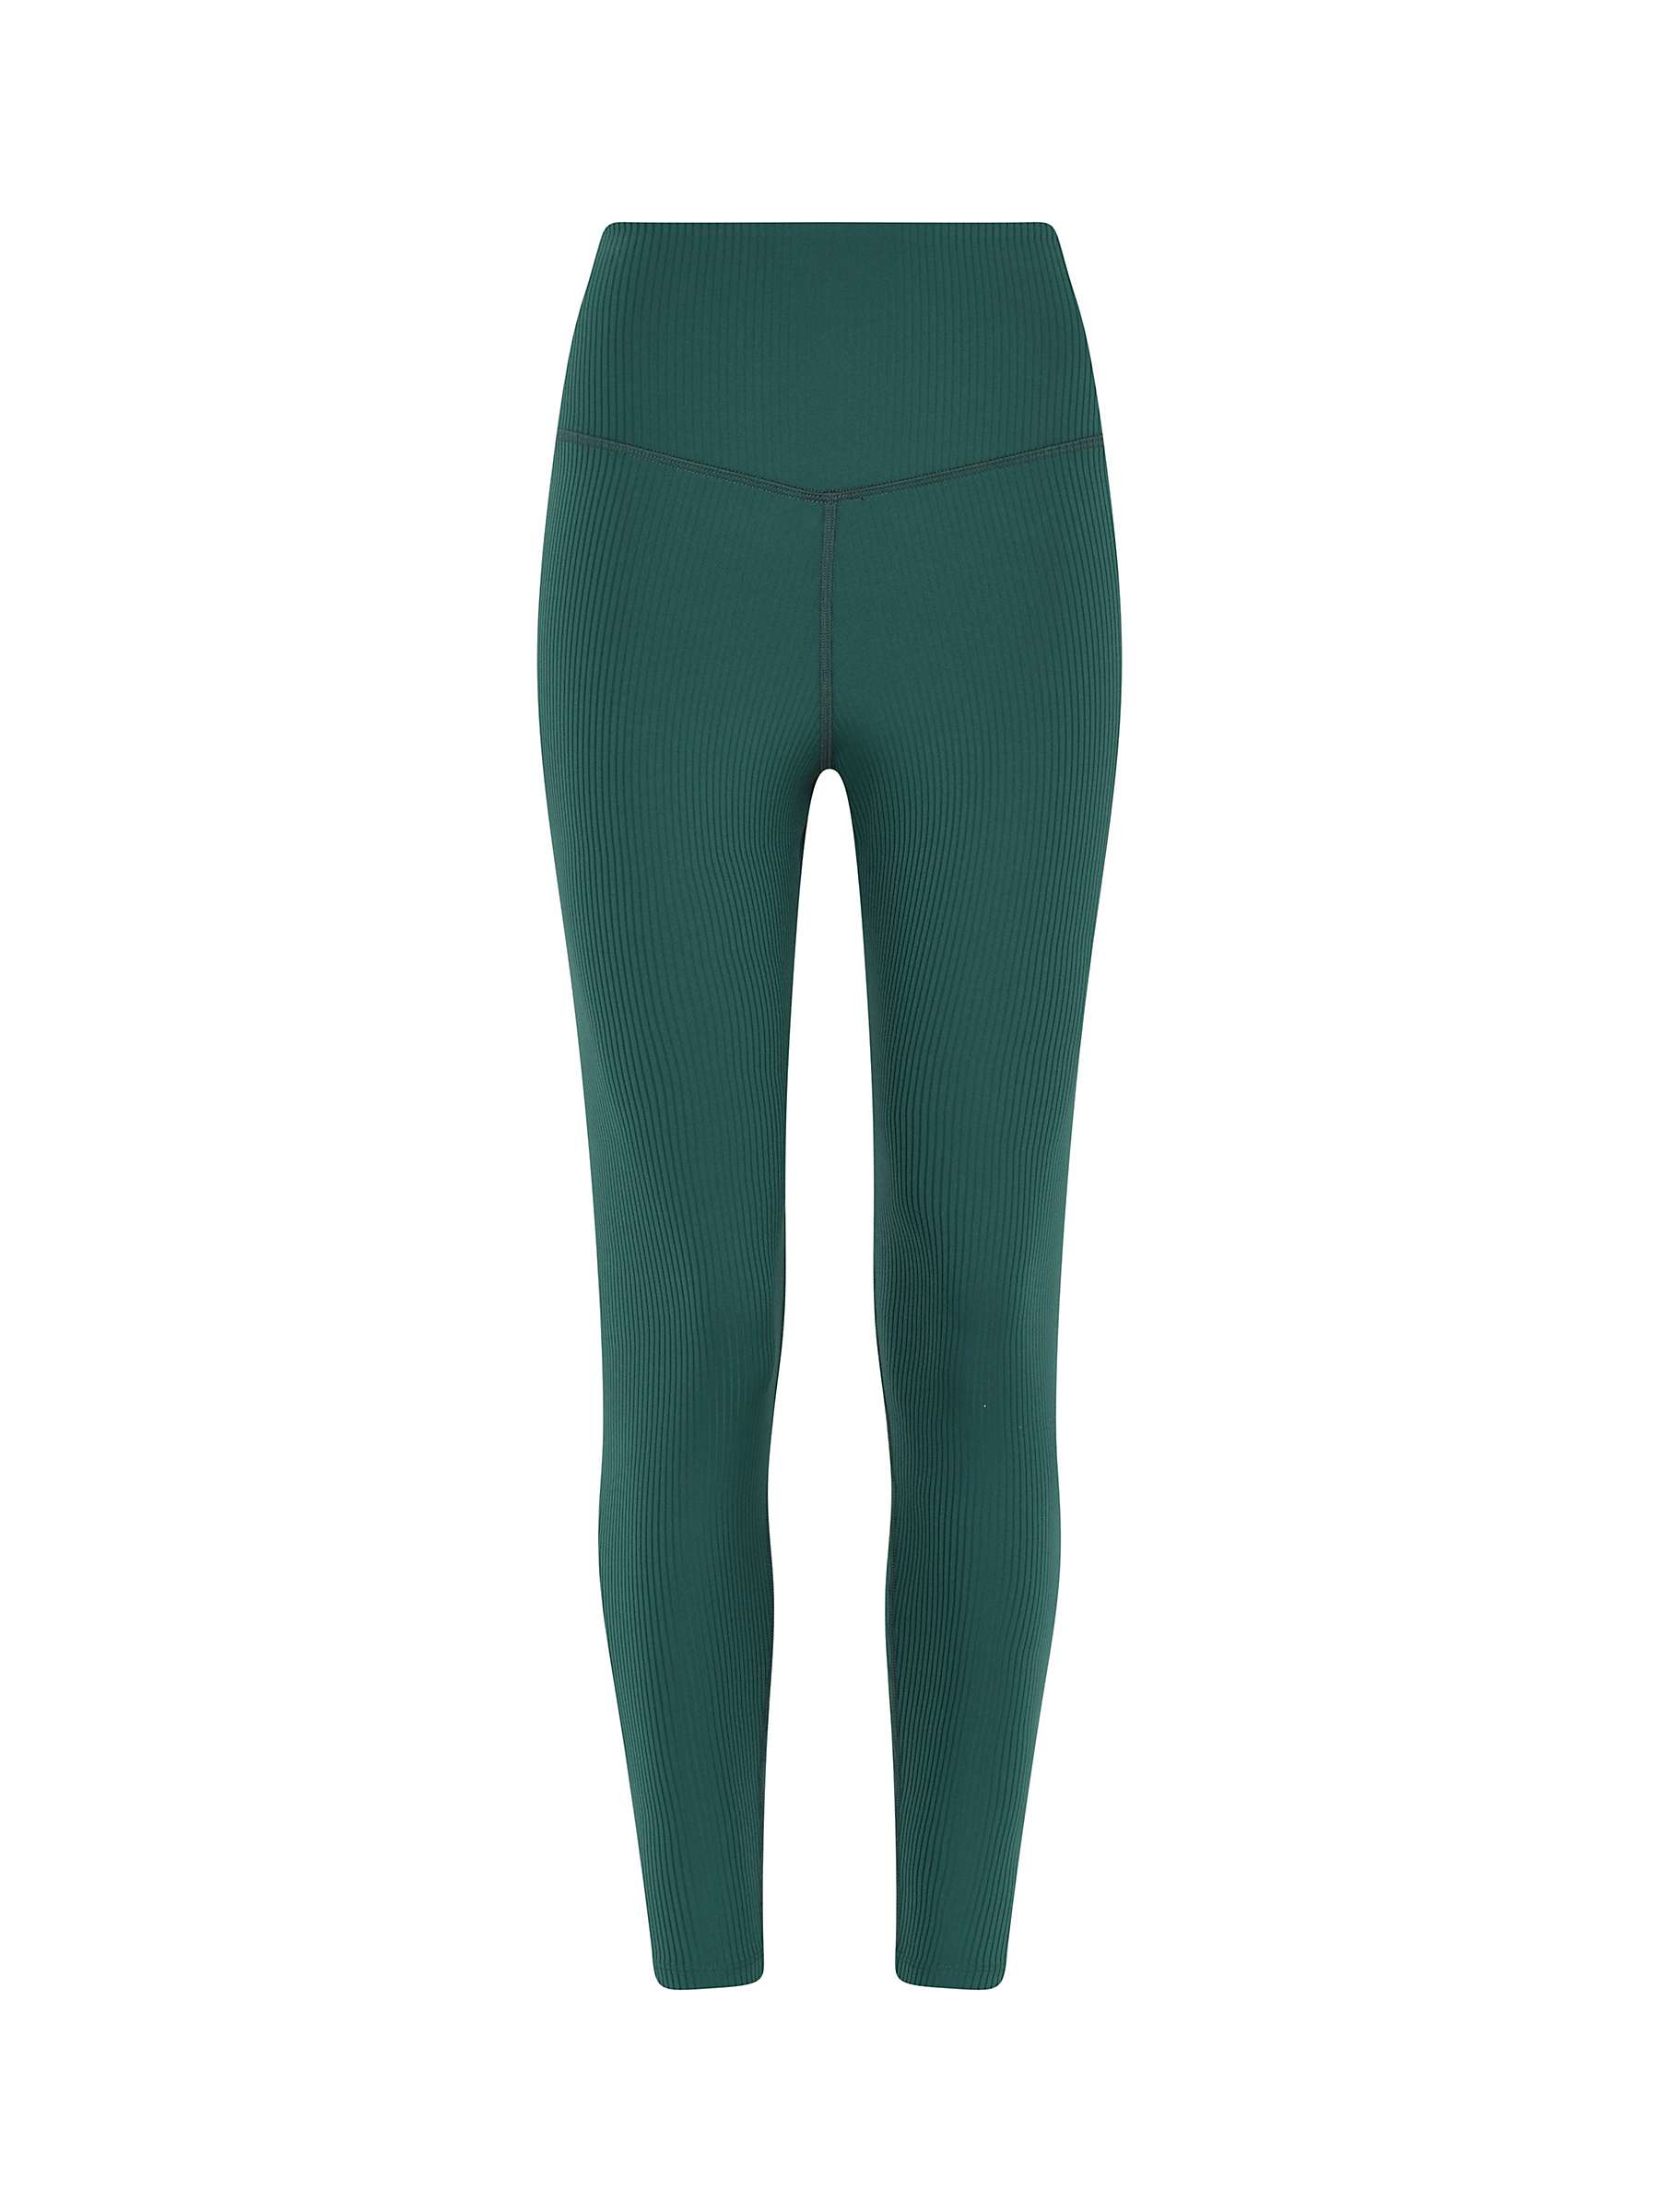 Buy Girlfriend Collective High Rise Compression Ribbed 7/8 Leggings, Rain Forest Online at johnlewis.com